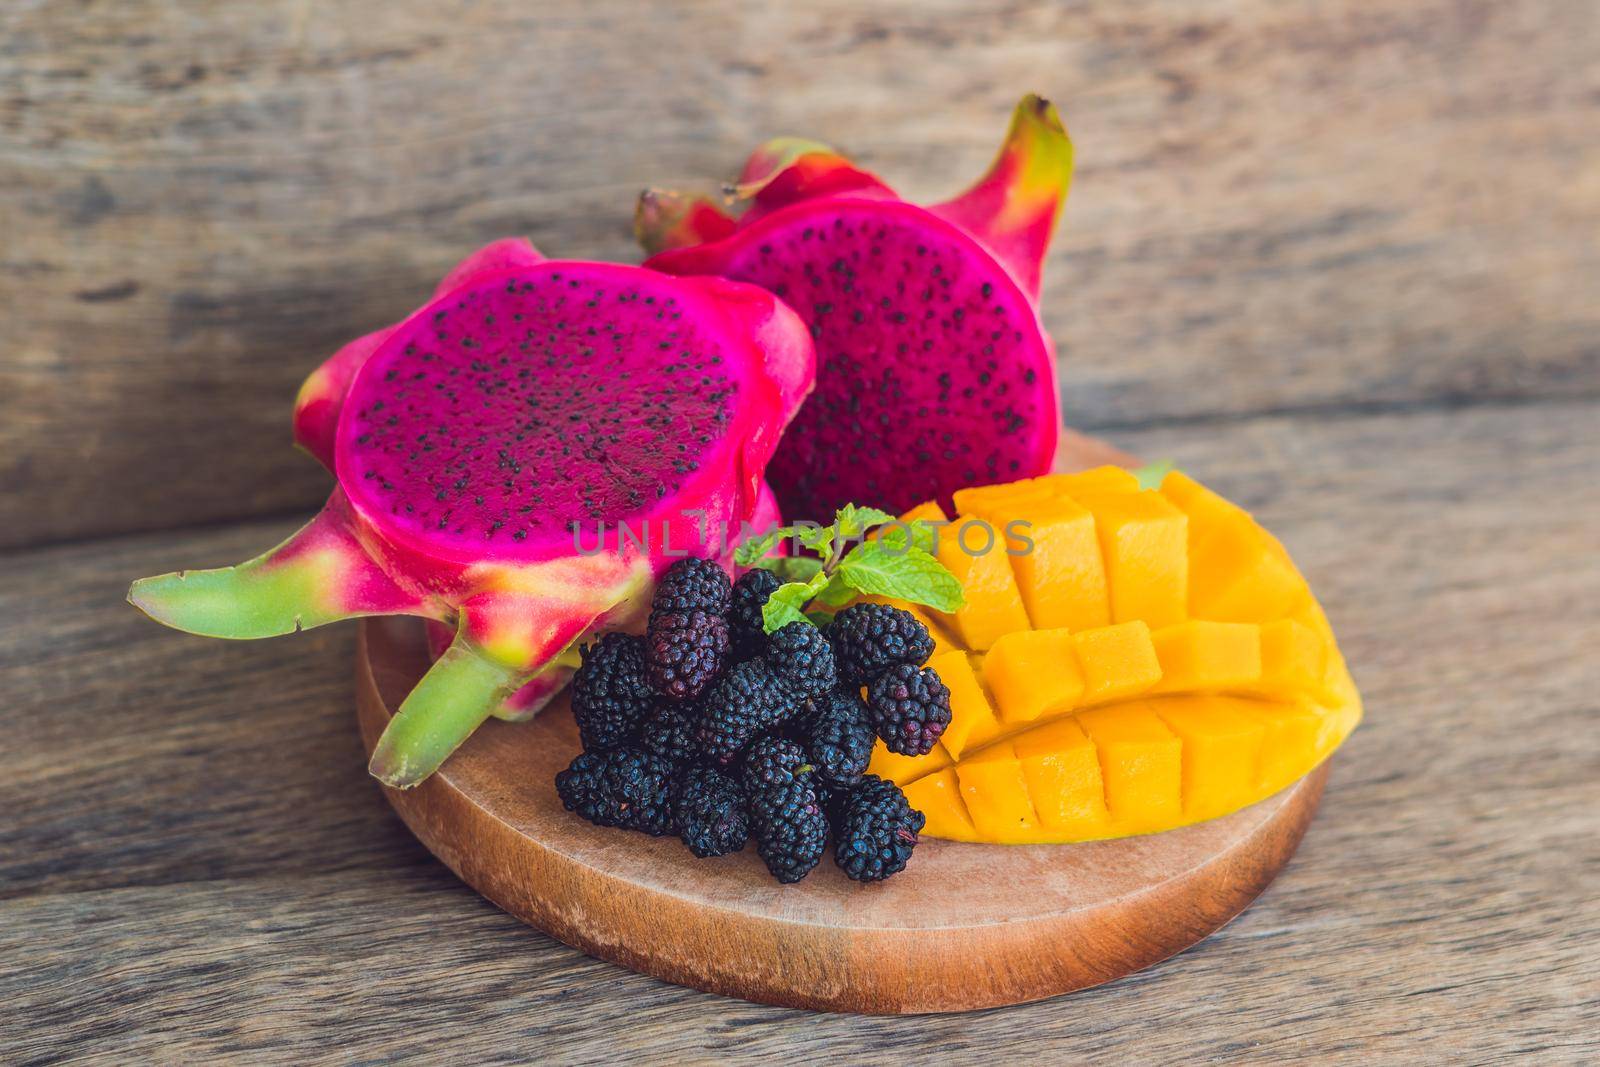 Sliced dragon fruit and mango on an old wooden background.